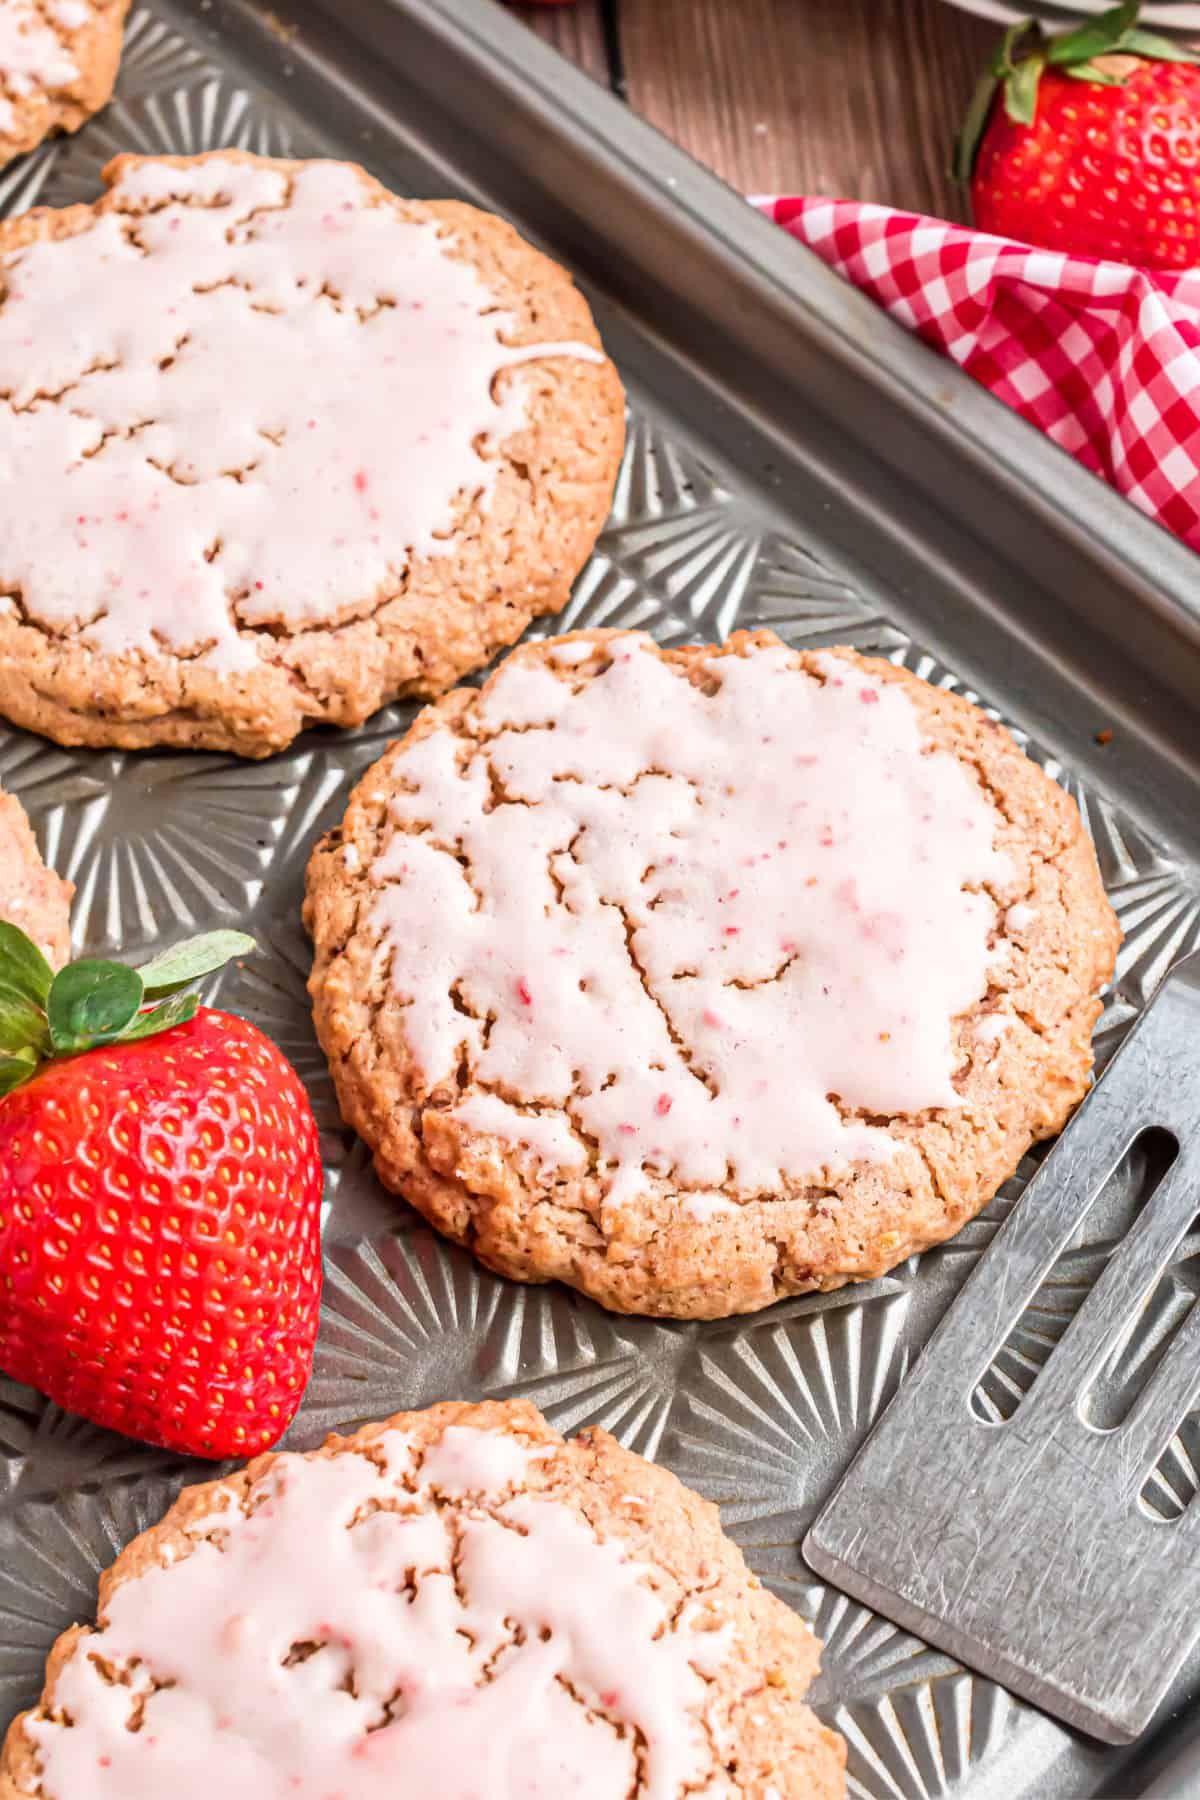 Iced strawberry cookies on a baking sheet.